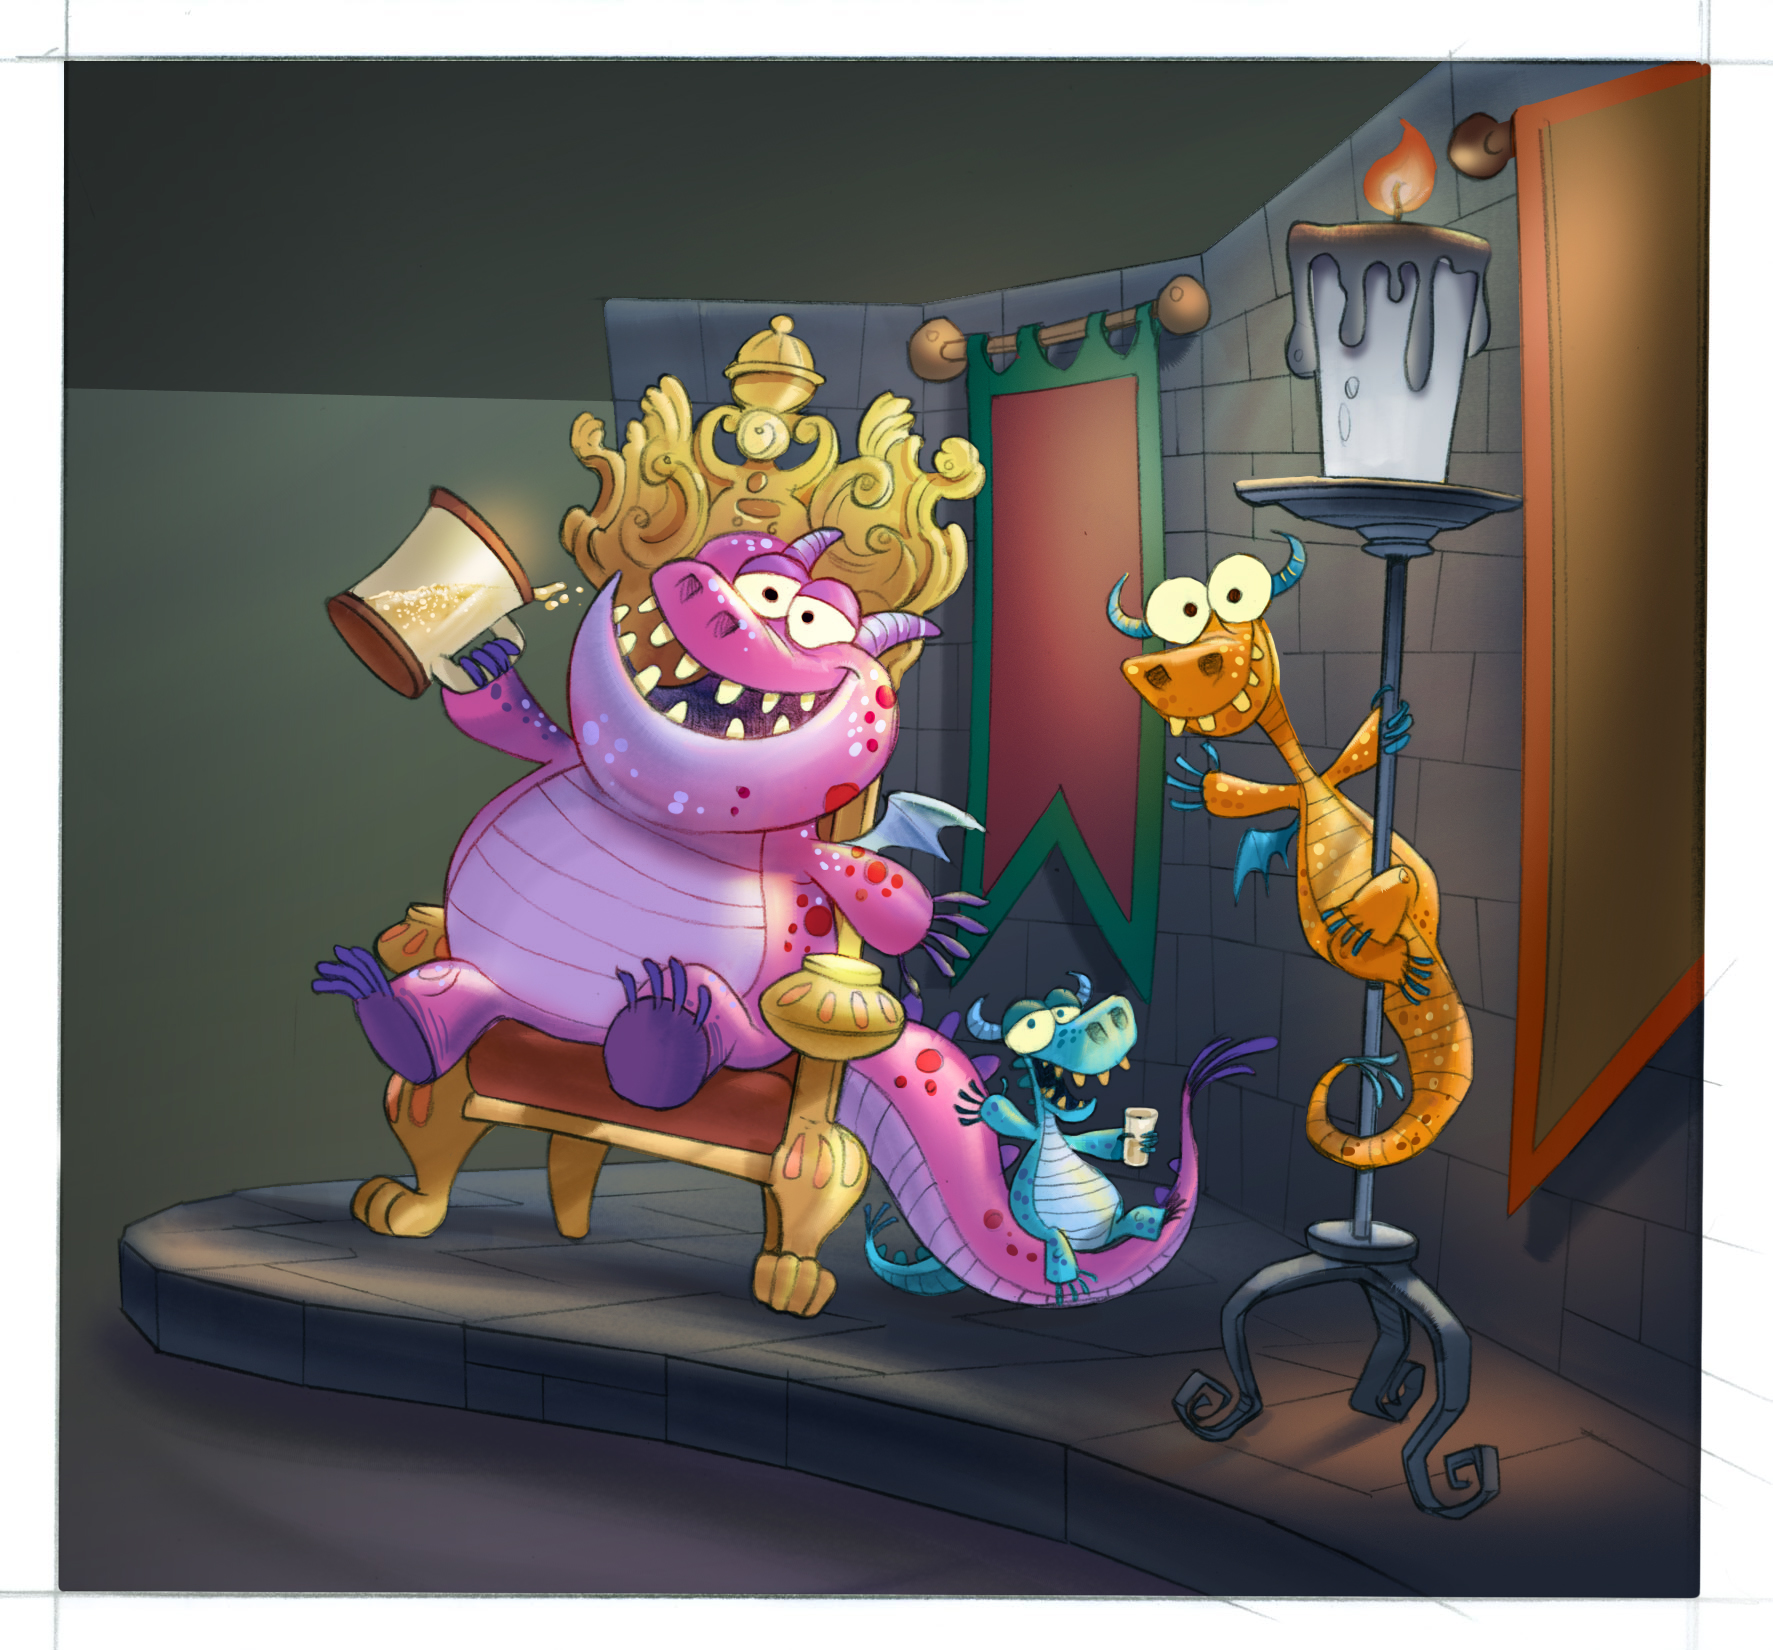 Lotte World Dragons Wild Shooting Character Concept Art